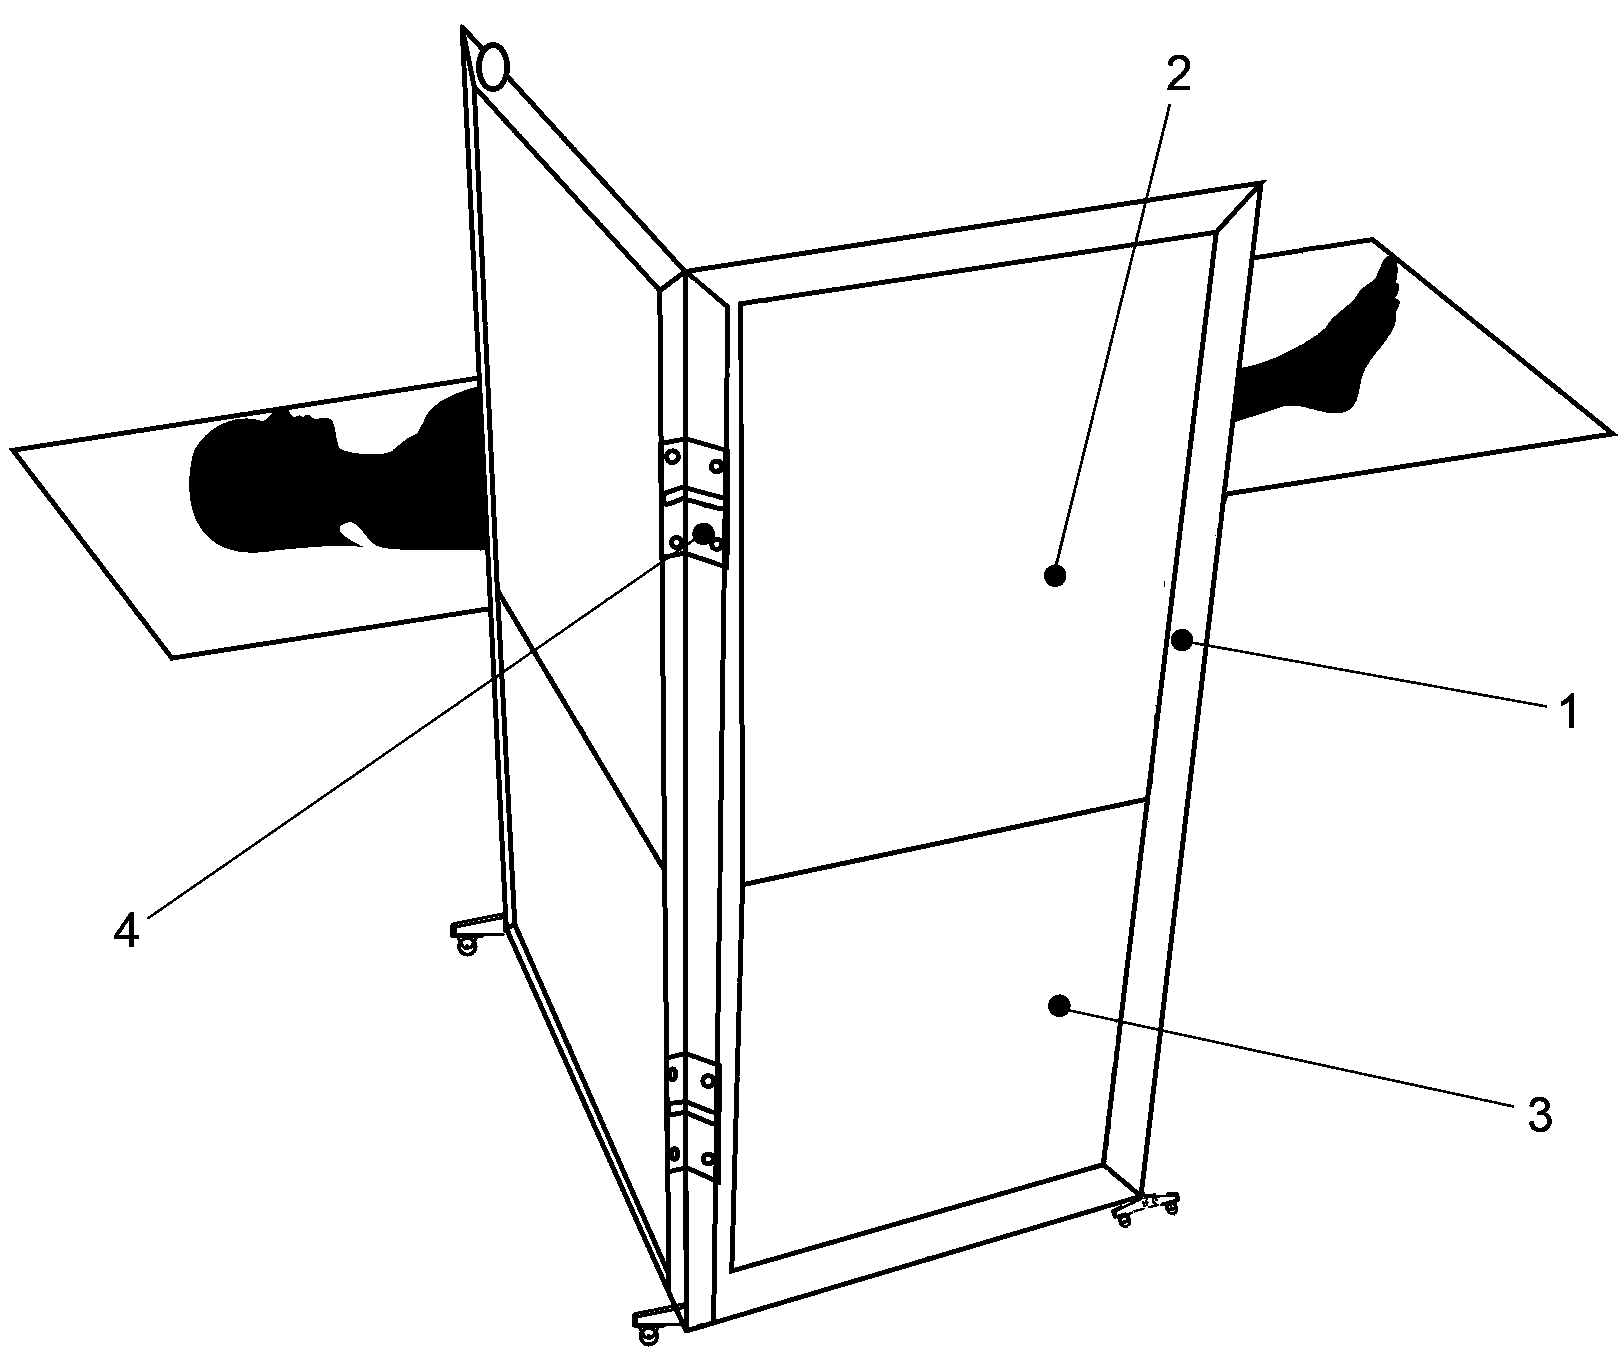 Medical assembly-type X-ray safety shield